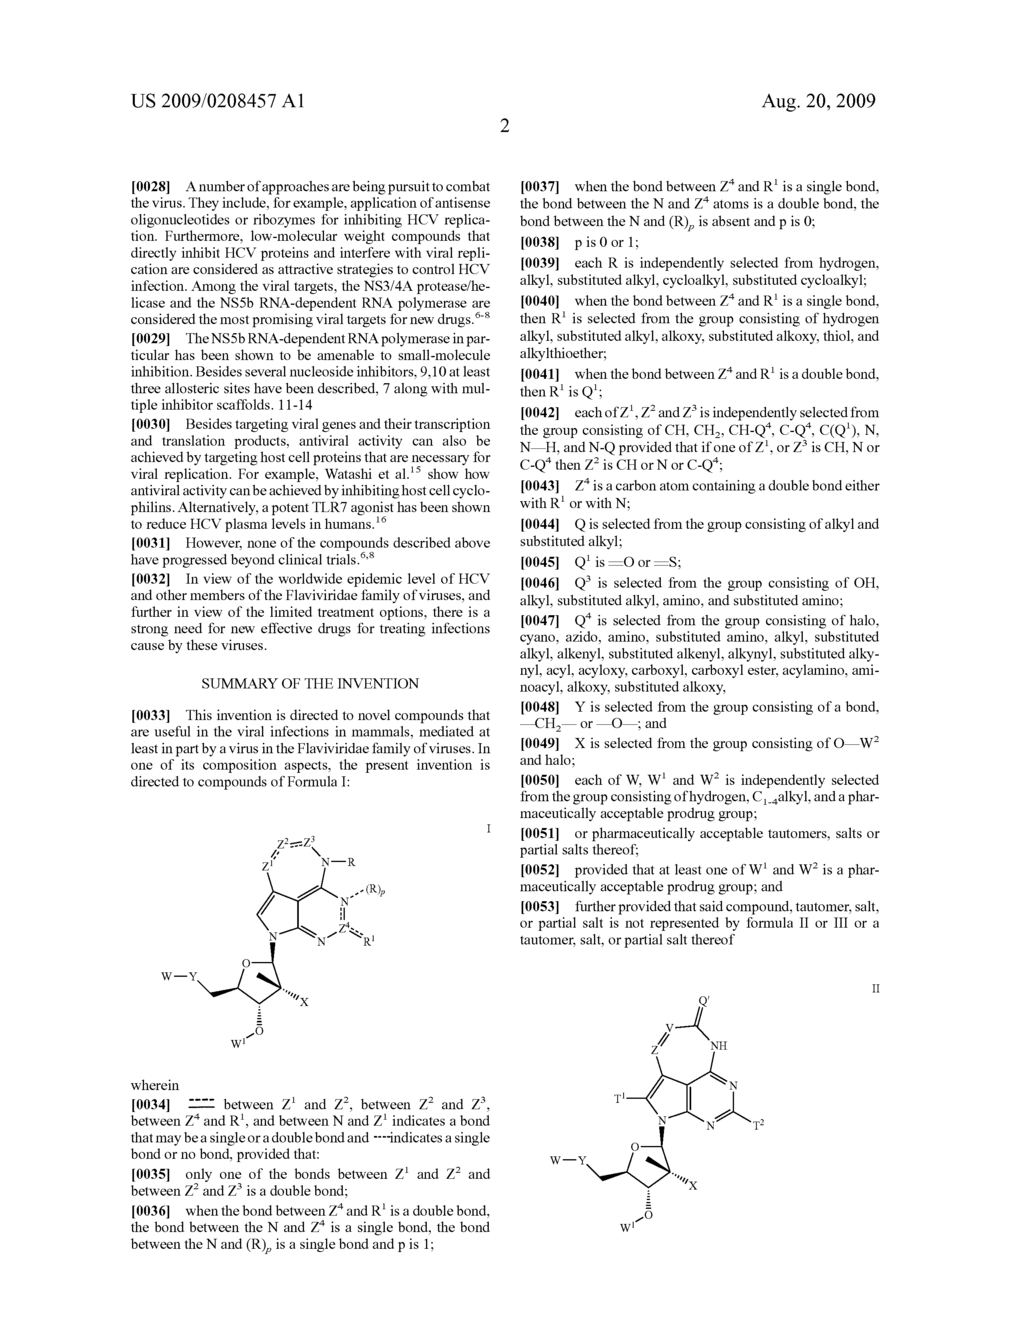 Tricyclic-Nucleoside Prodrugs for Treating Viral Infections - diagram, schematic, and image 03